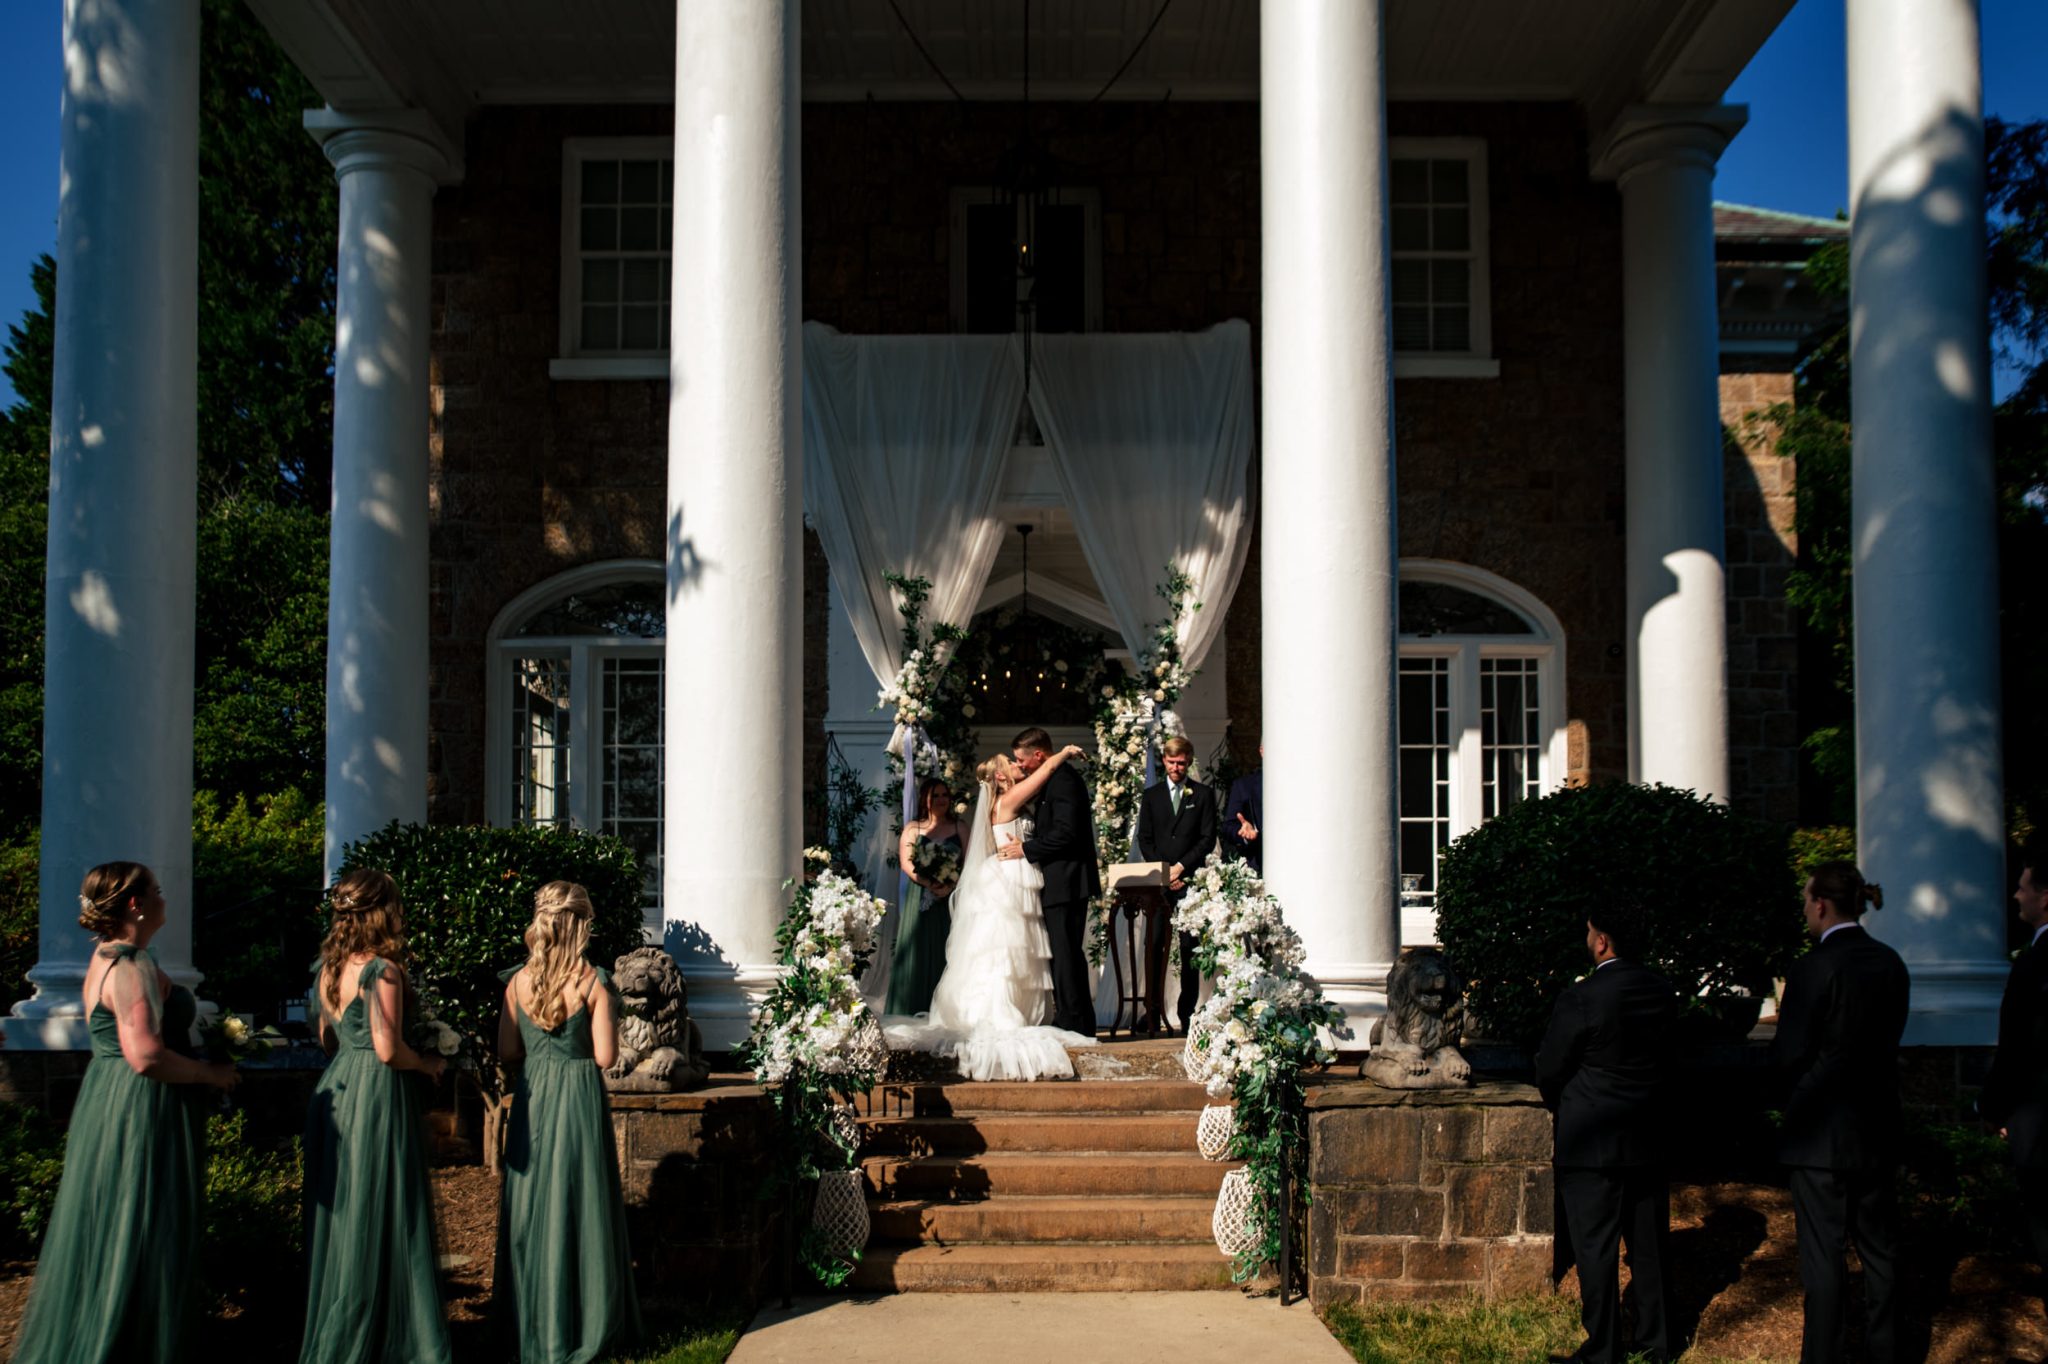 A wedding ceremony in front of a mansion.